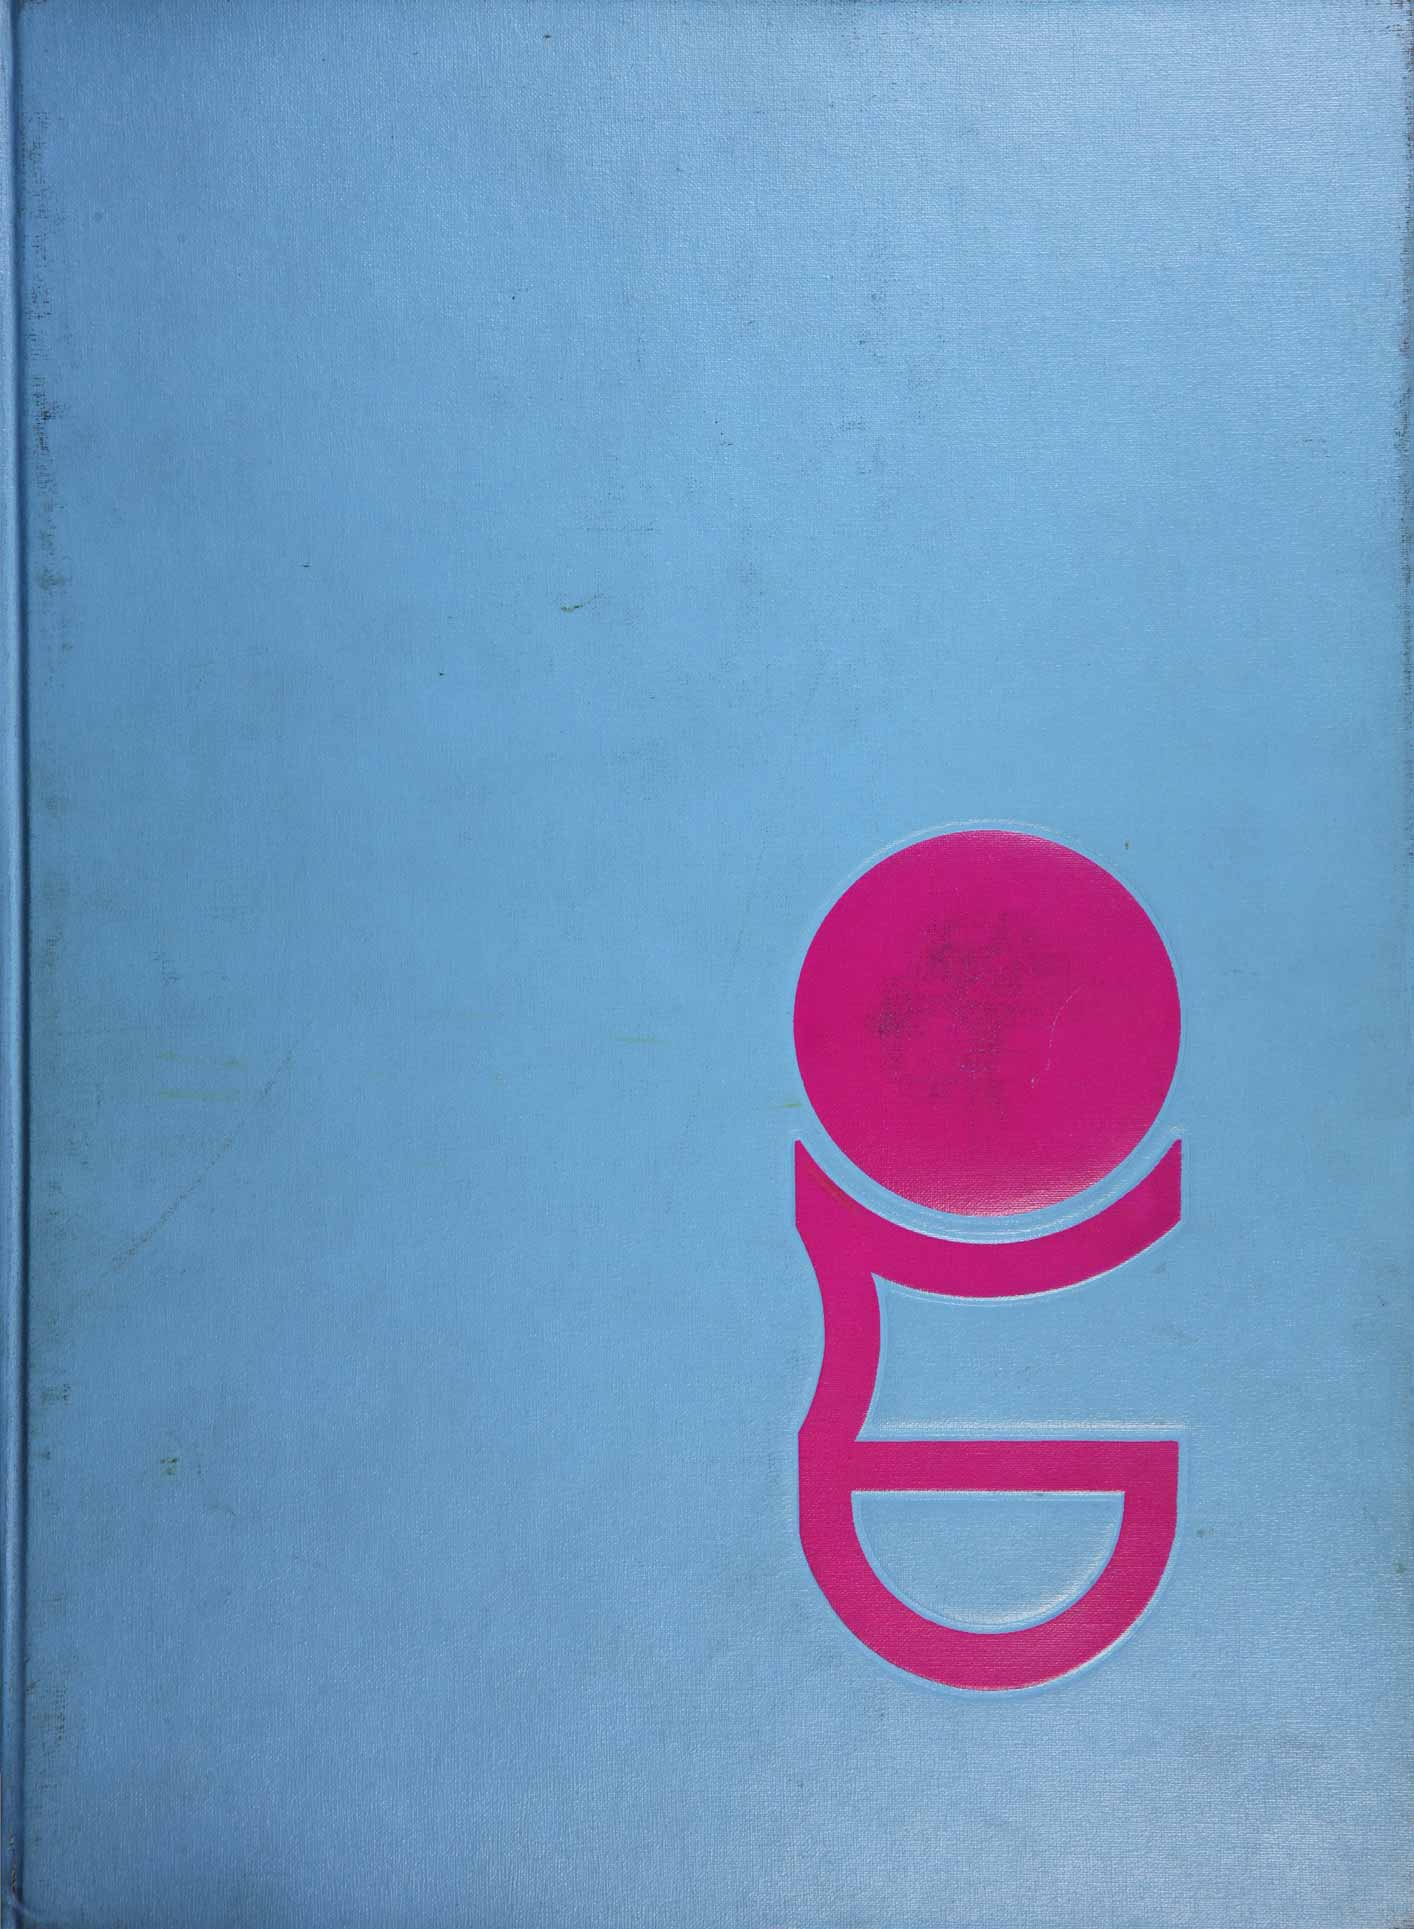 McGill Yearbook: 1969